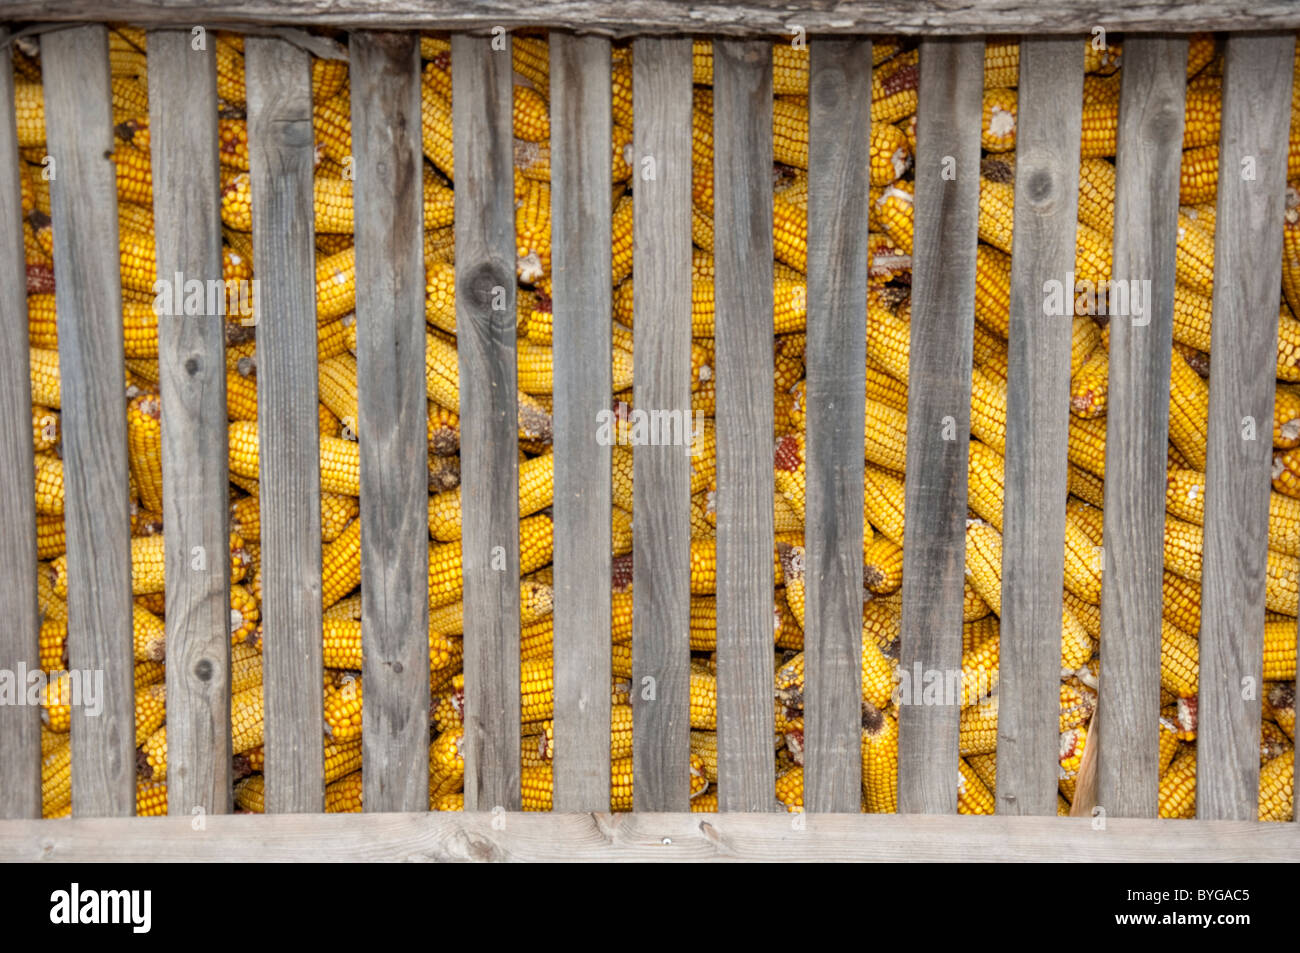 Maize, Corn (Zea mays). Corn cobs in a drying shed. Stock Photo